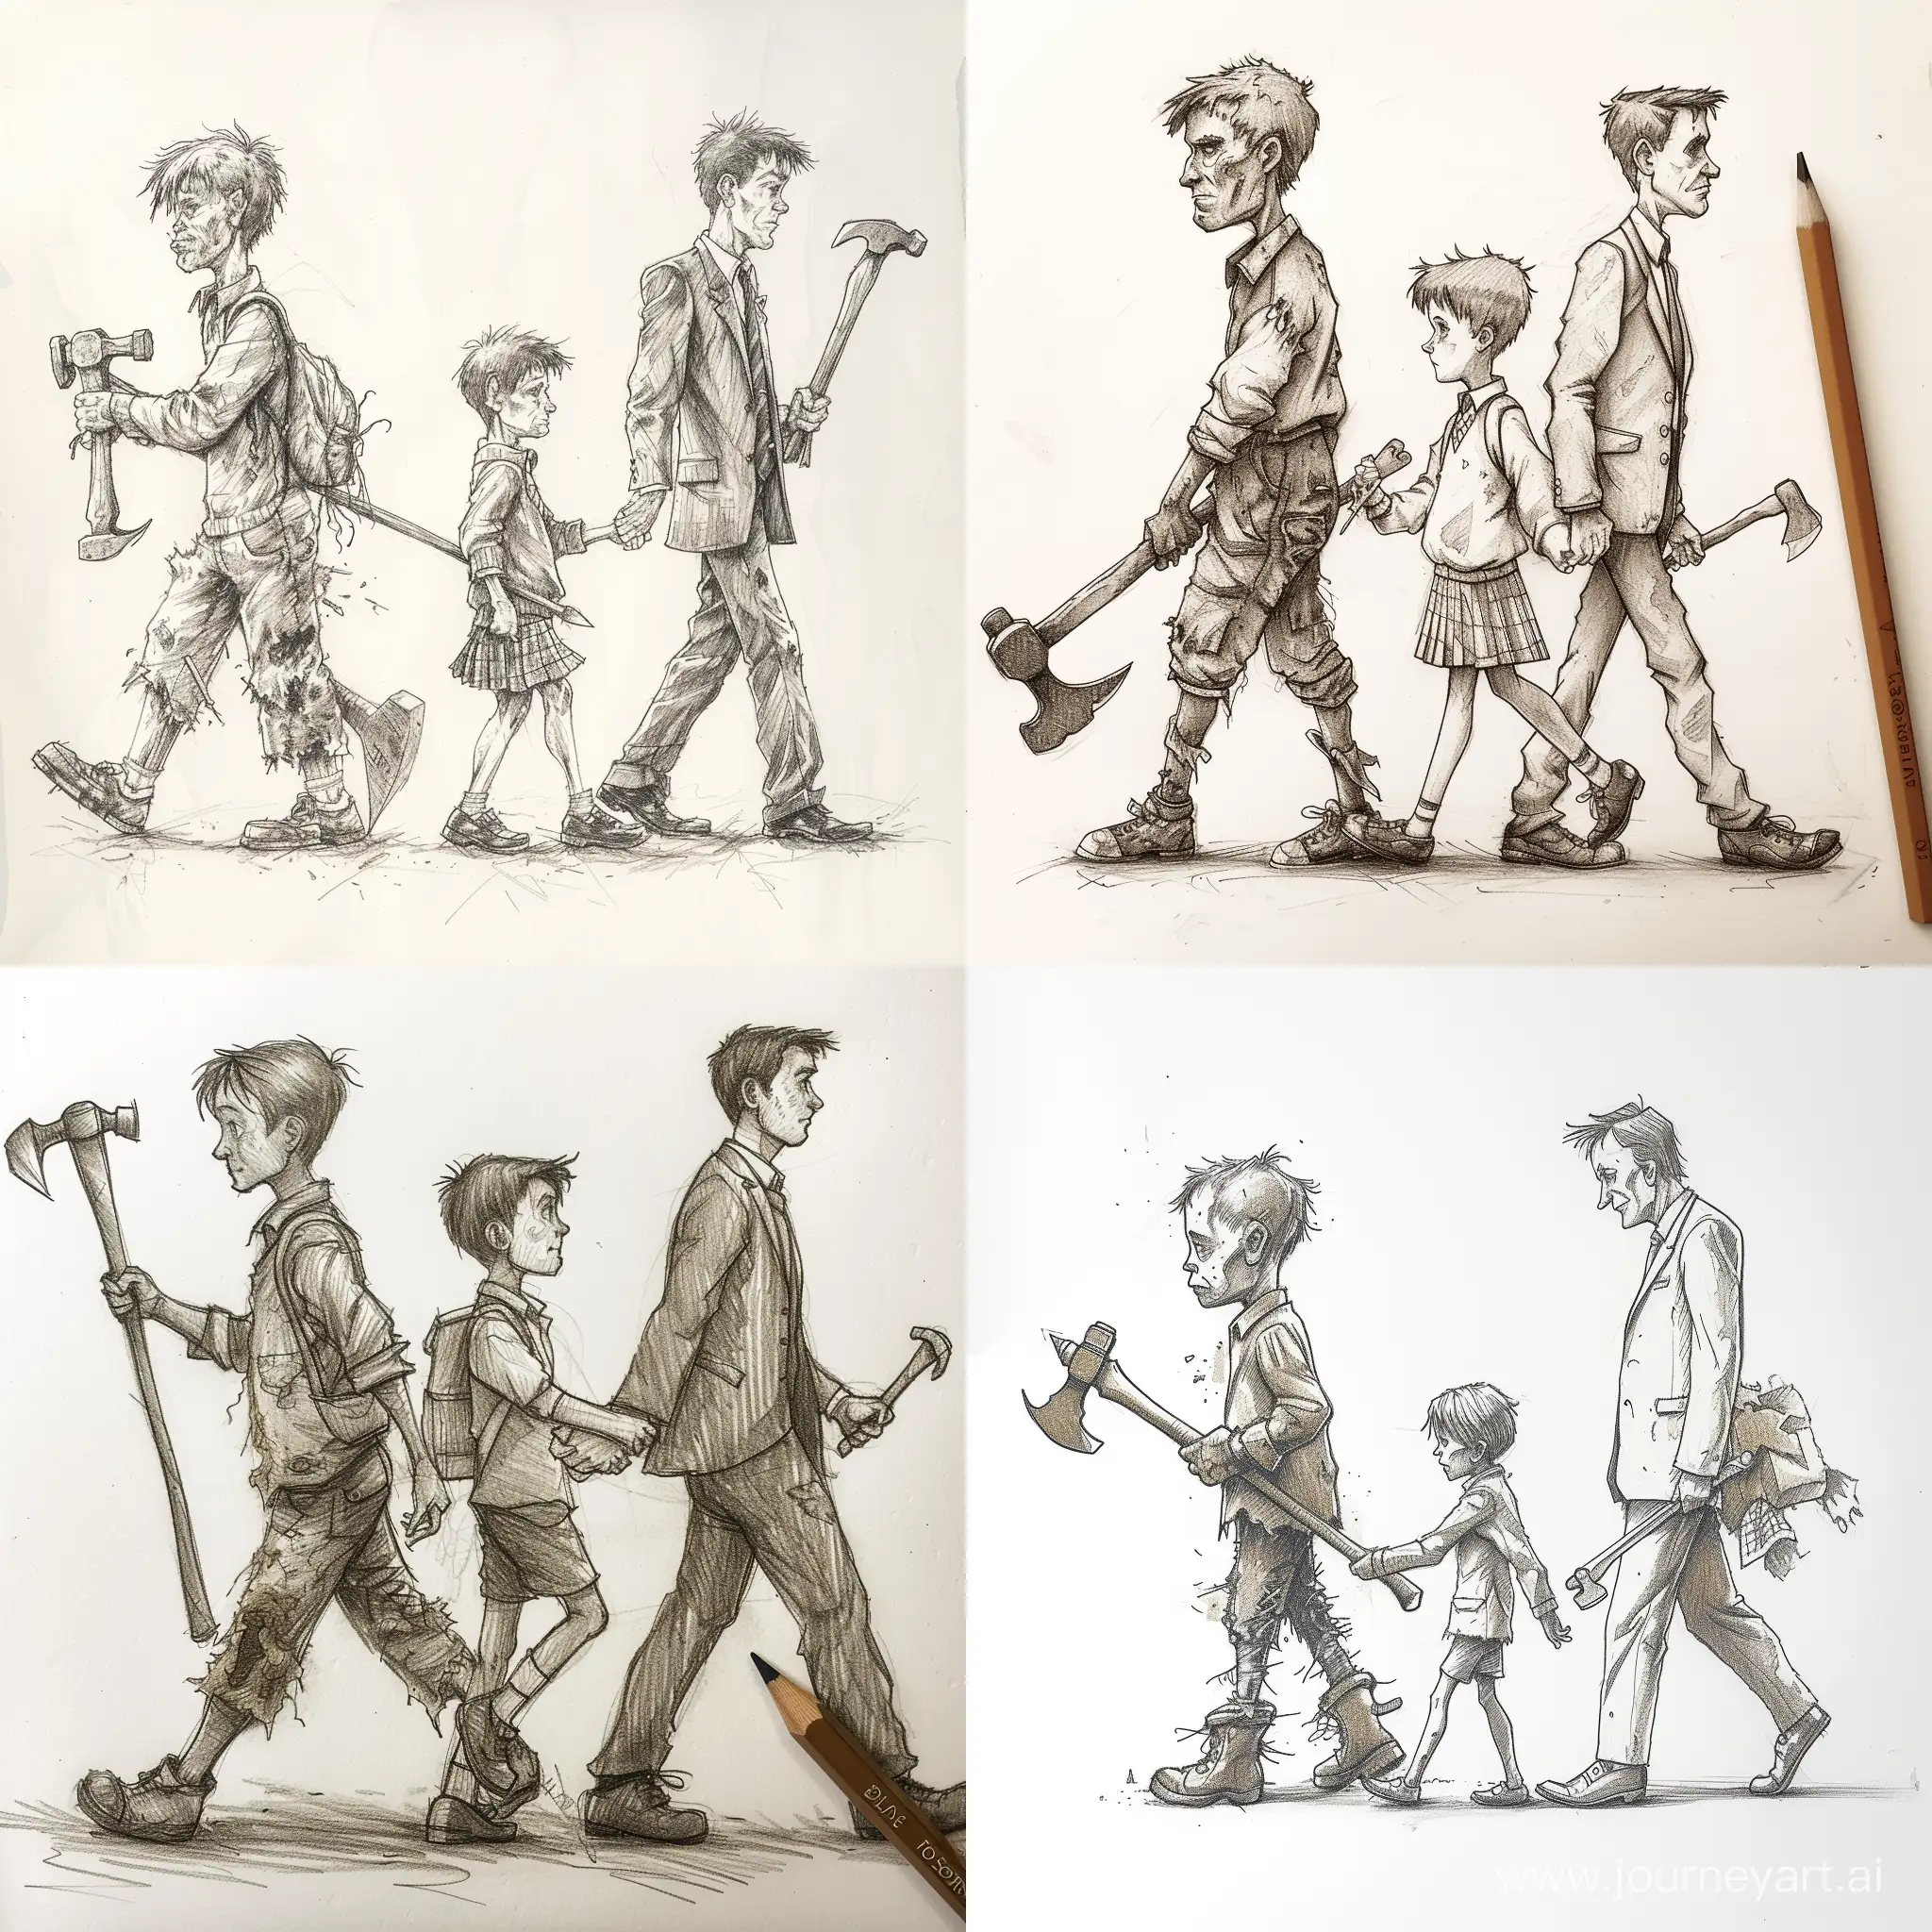 A pencil drawn illustration consisting of three characters ... First is a poor boy in a rough and bad condition holding a hammer and an axe ... The second and third characters are a school boy of the very age of first character going to school while holding the hand of third character, a man ... Second and third character are rich and we'll dressed ... Put the first character at left and the second and third at right while make them walk in opposite direction where we can only see their backs ...